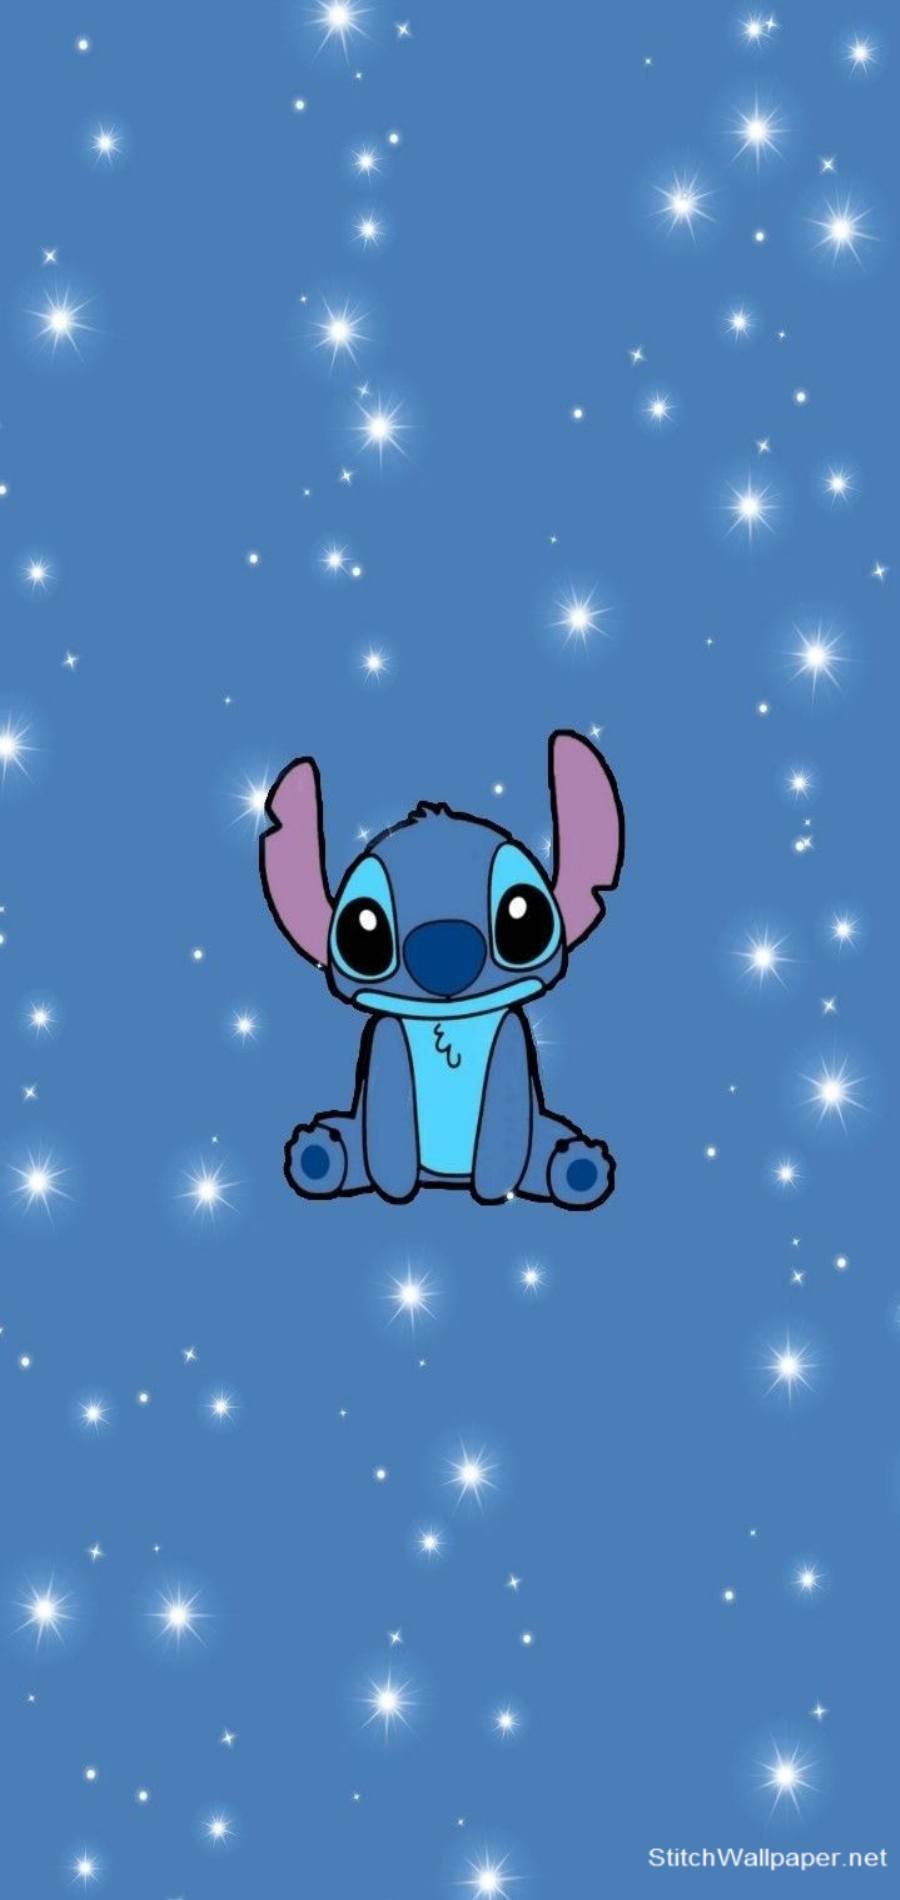 stitch wallpaper for iphone